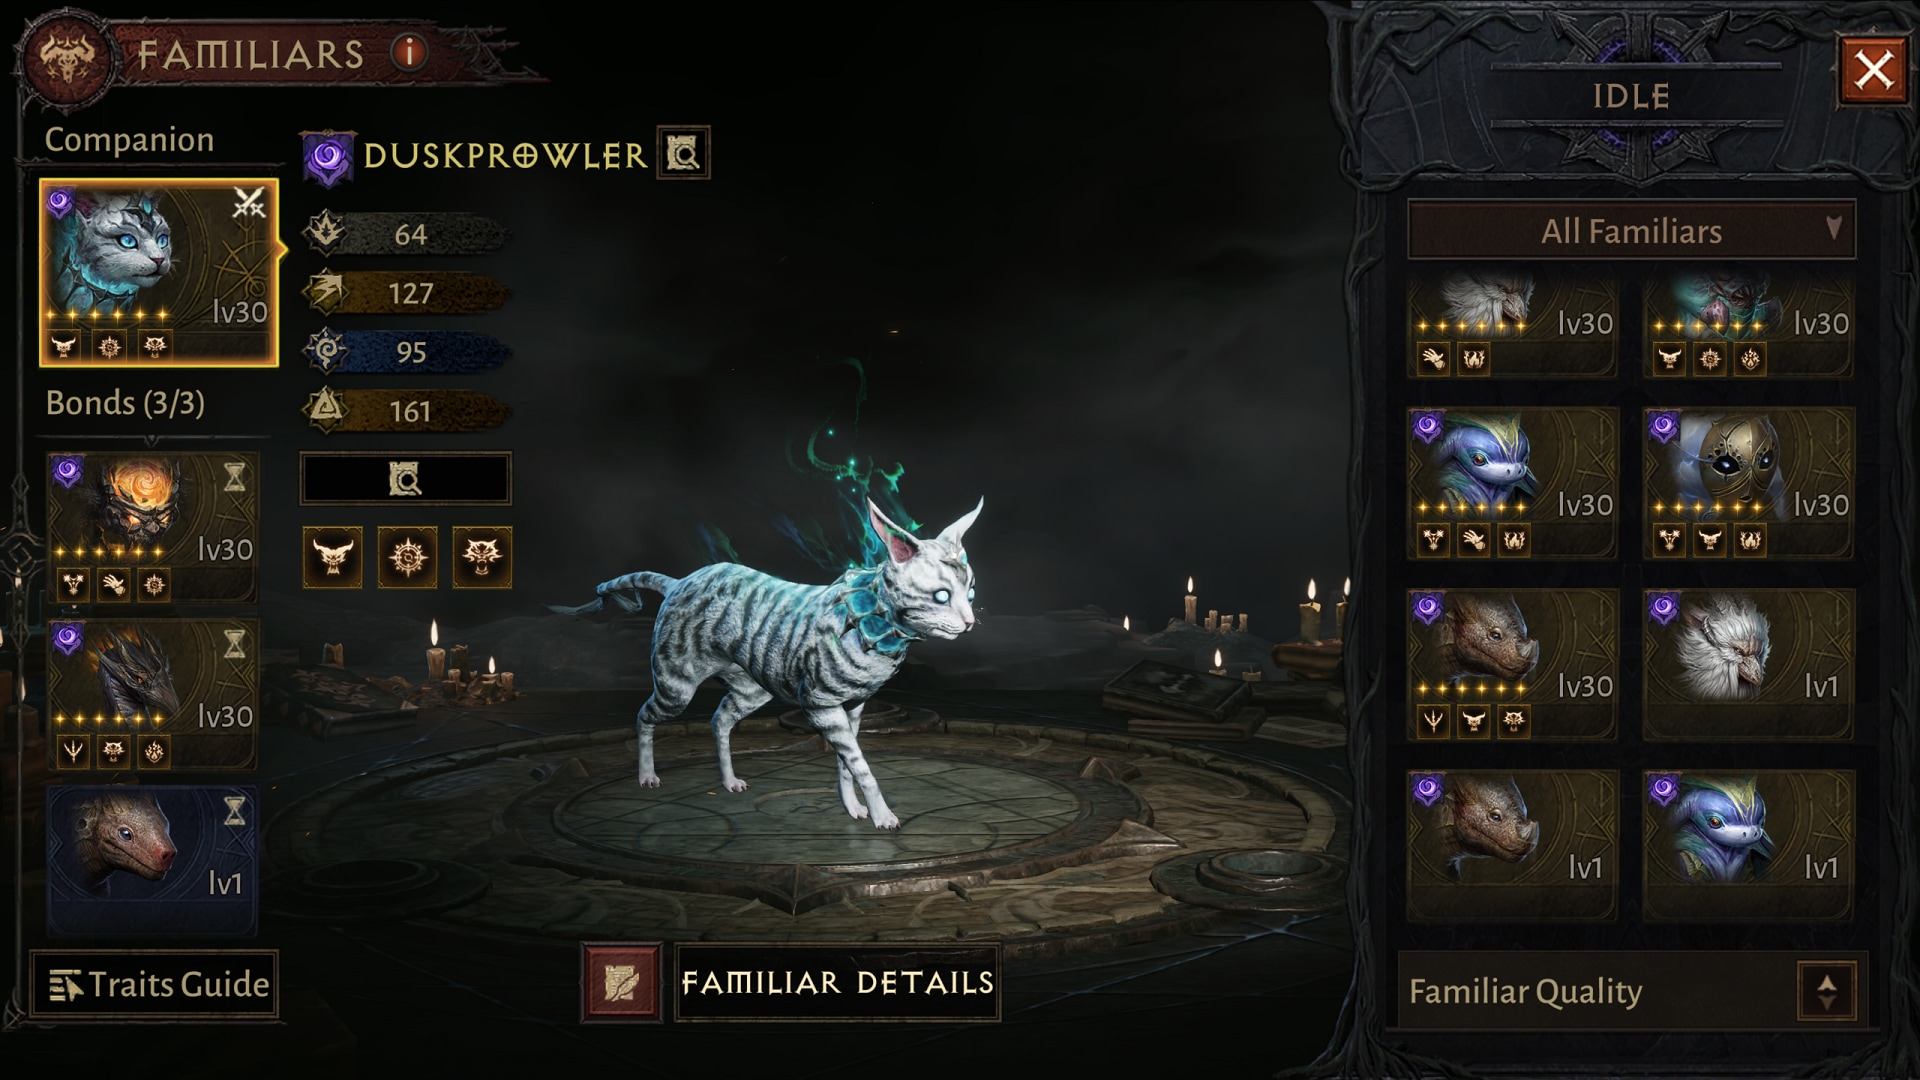 New Storm Familiars Bundle Available Now